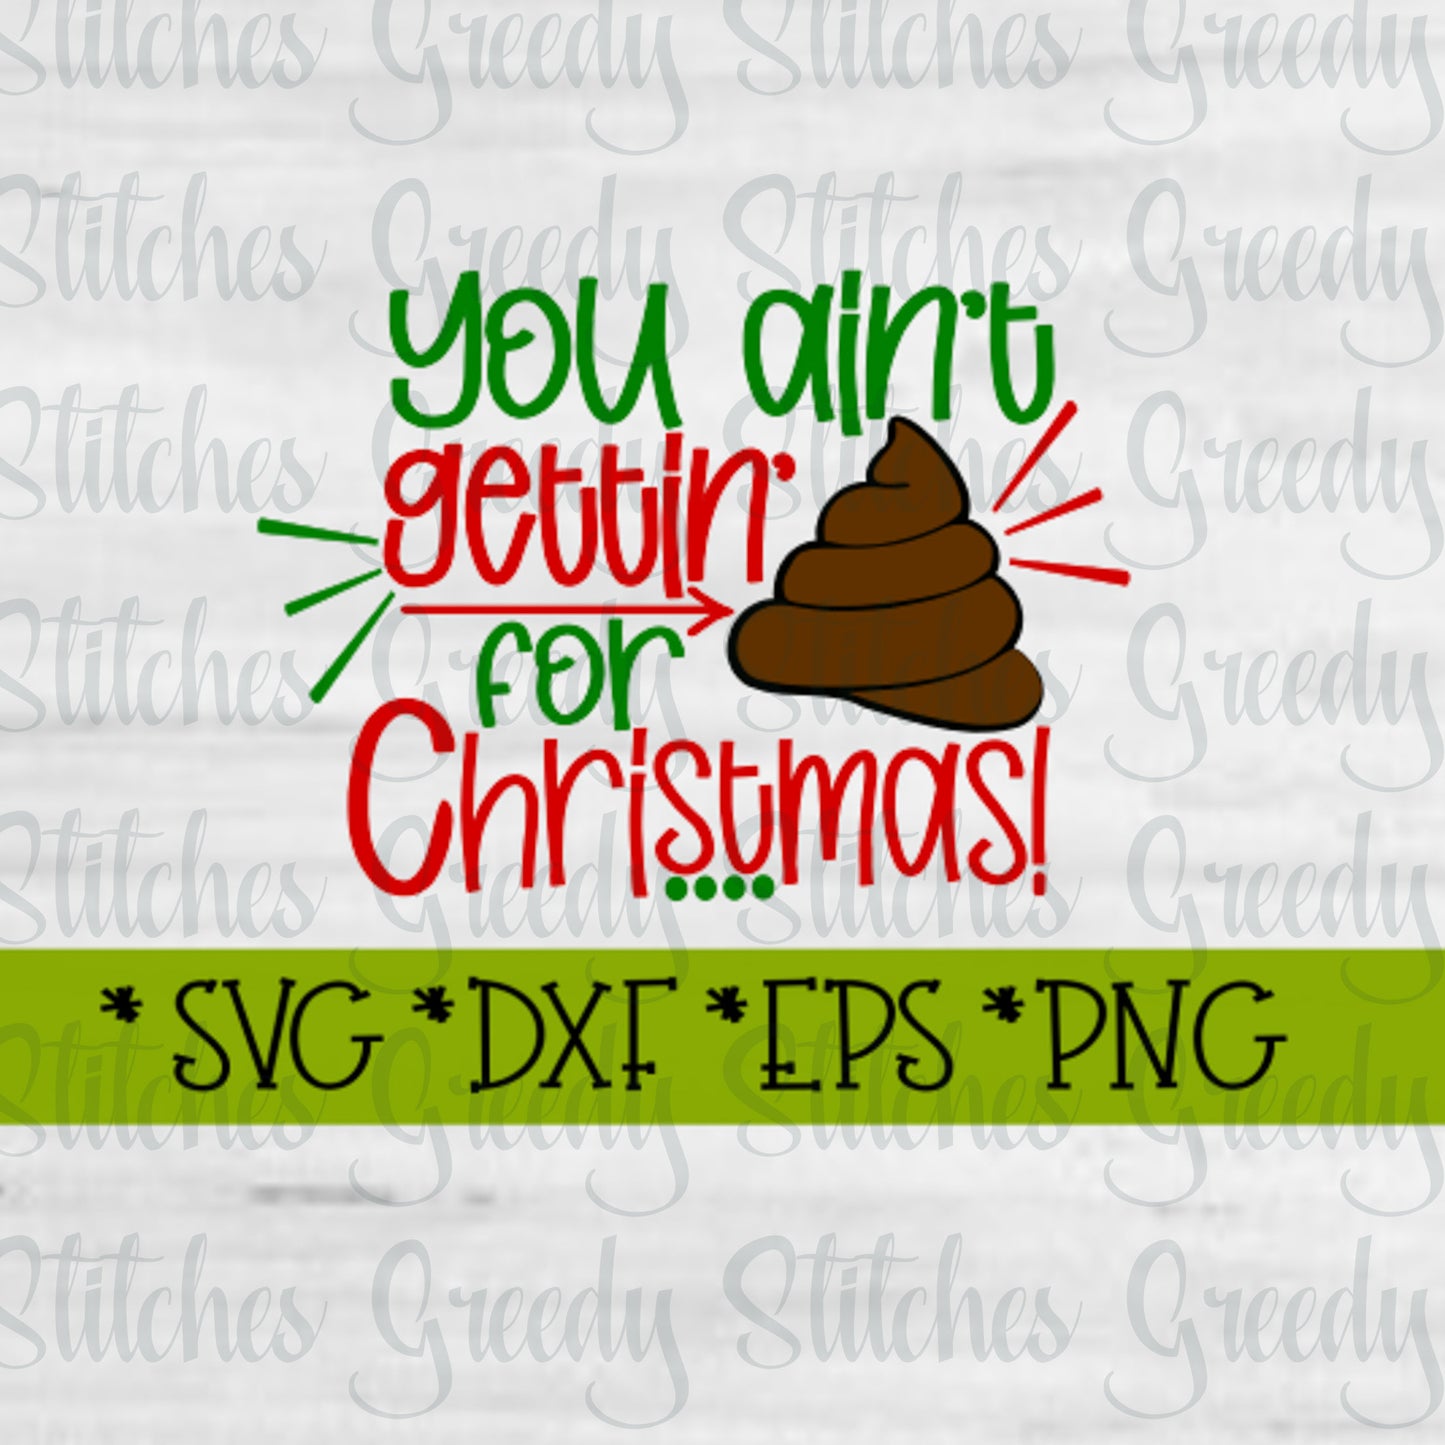 You Ain&#39;t Gettin&#39; Sh*t For Christmas svg, dxf, eps, png. Christmas SvG | Toilet Paper SvG | SVG | Christmas DxF | Instant Download Cut File